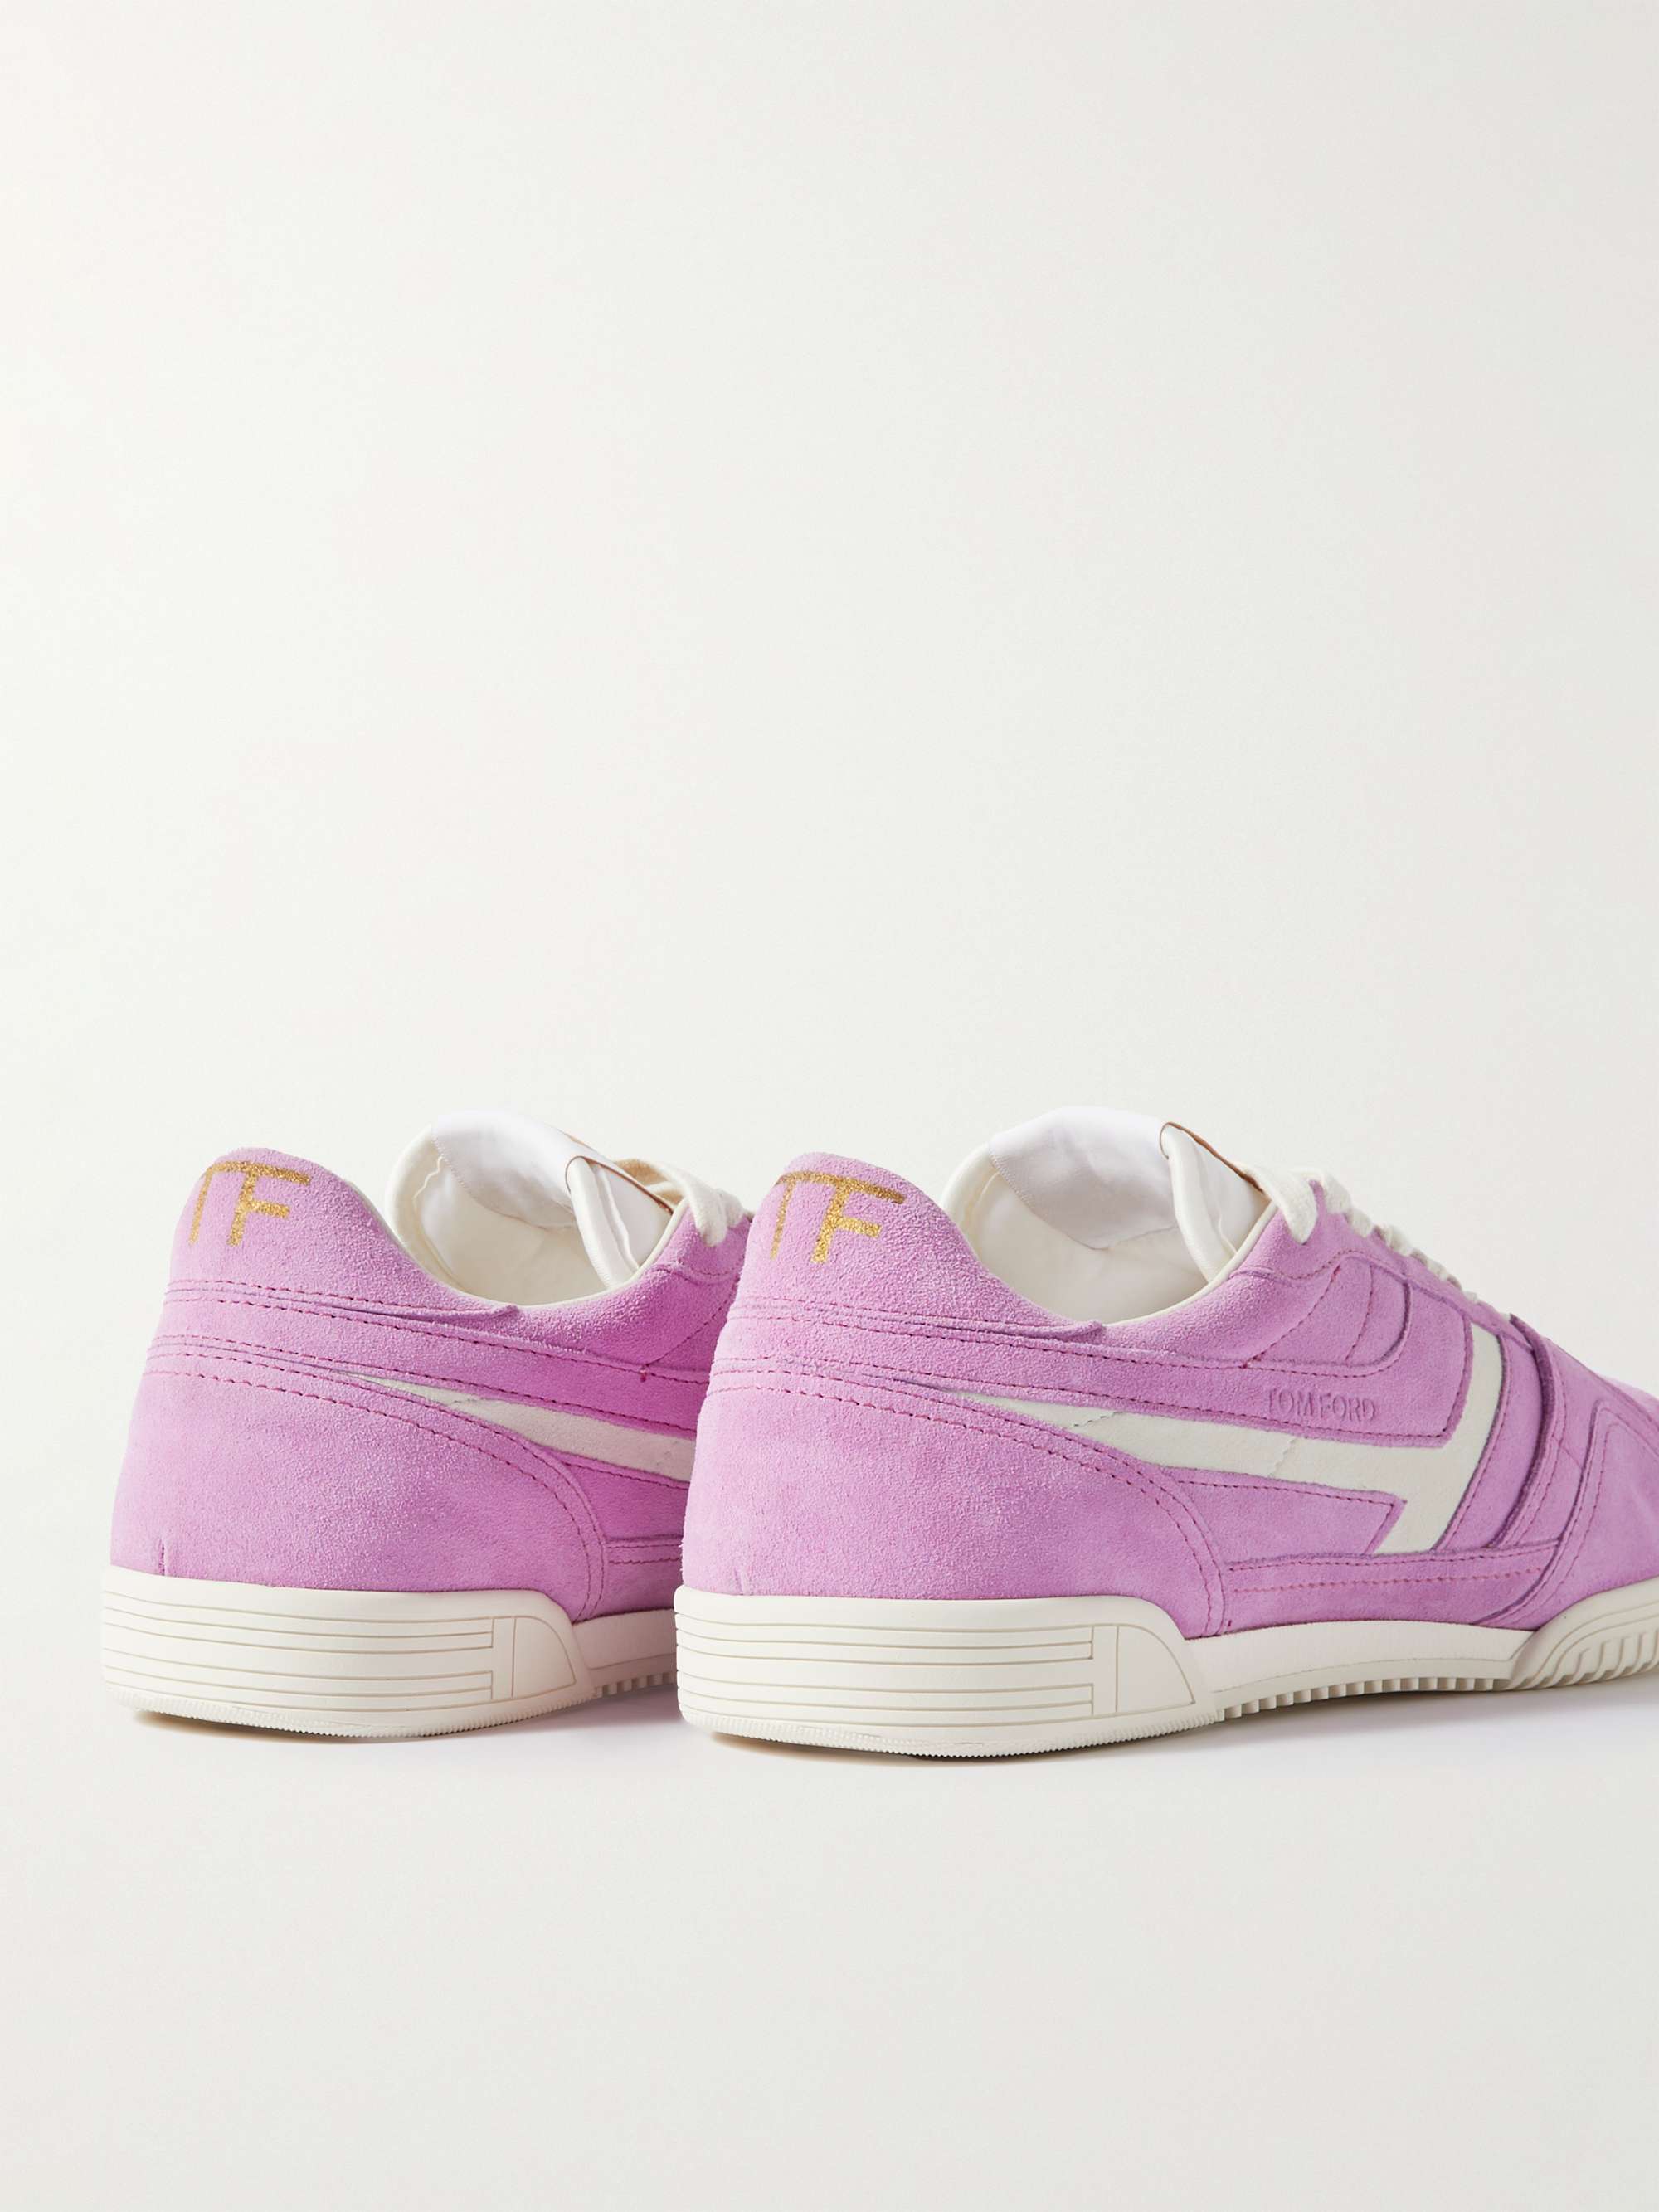 TOM FORD Jackson Suede Sneakers